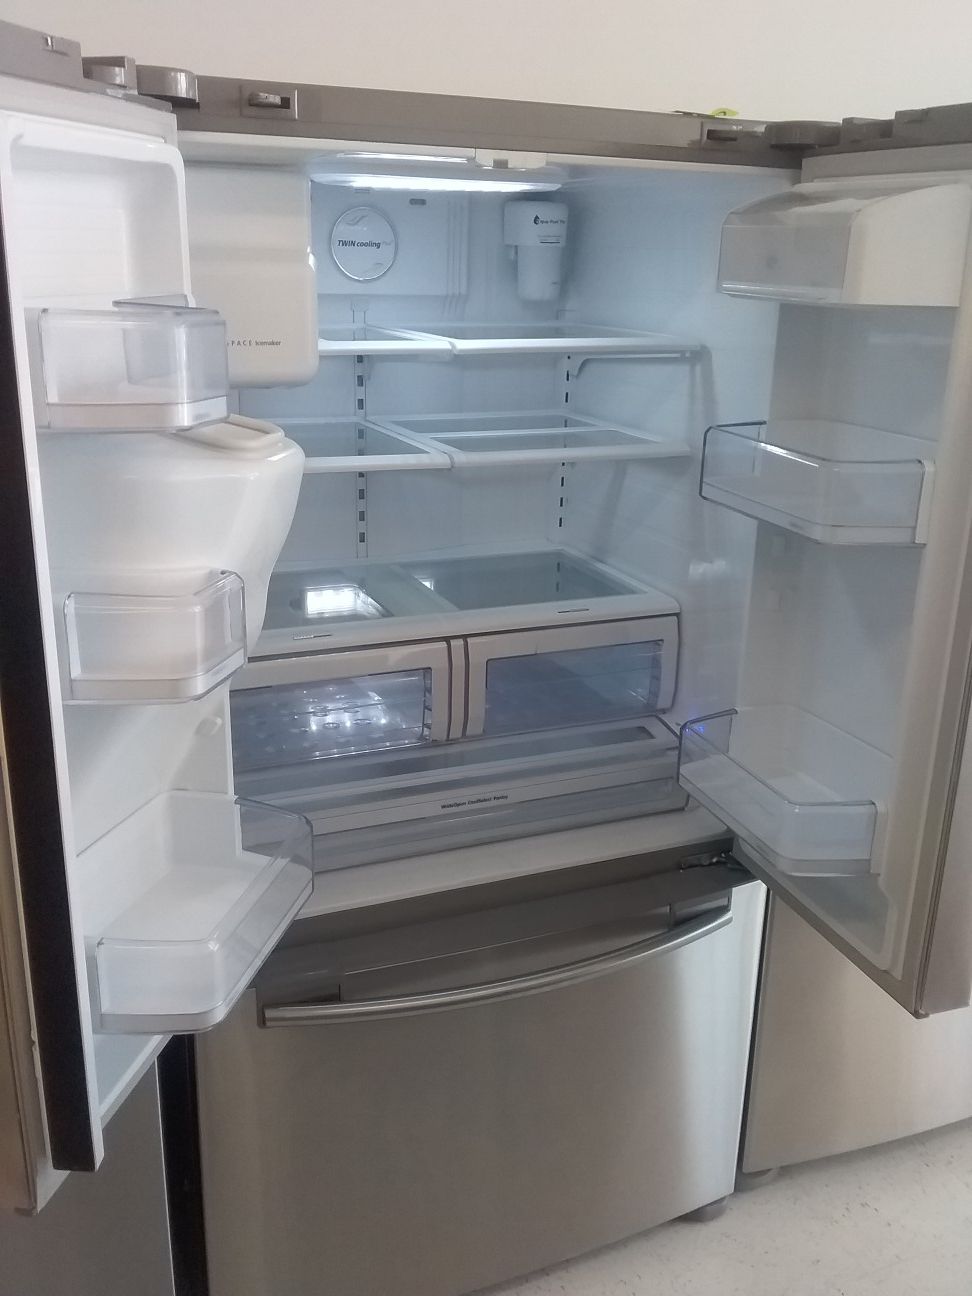 Samsung French doors stainless steel refrigerator used good condition 90days warranty